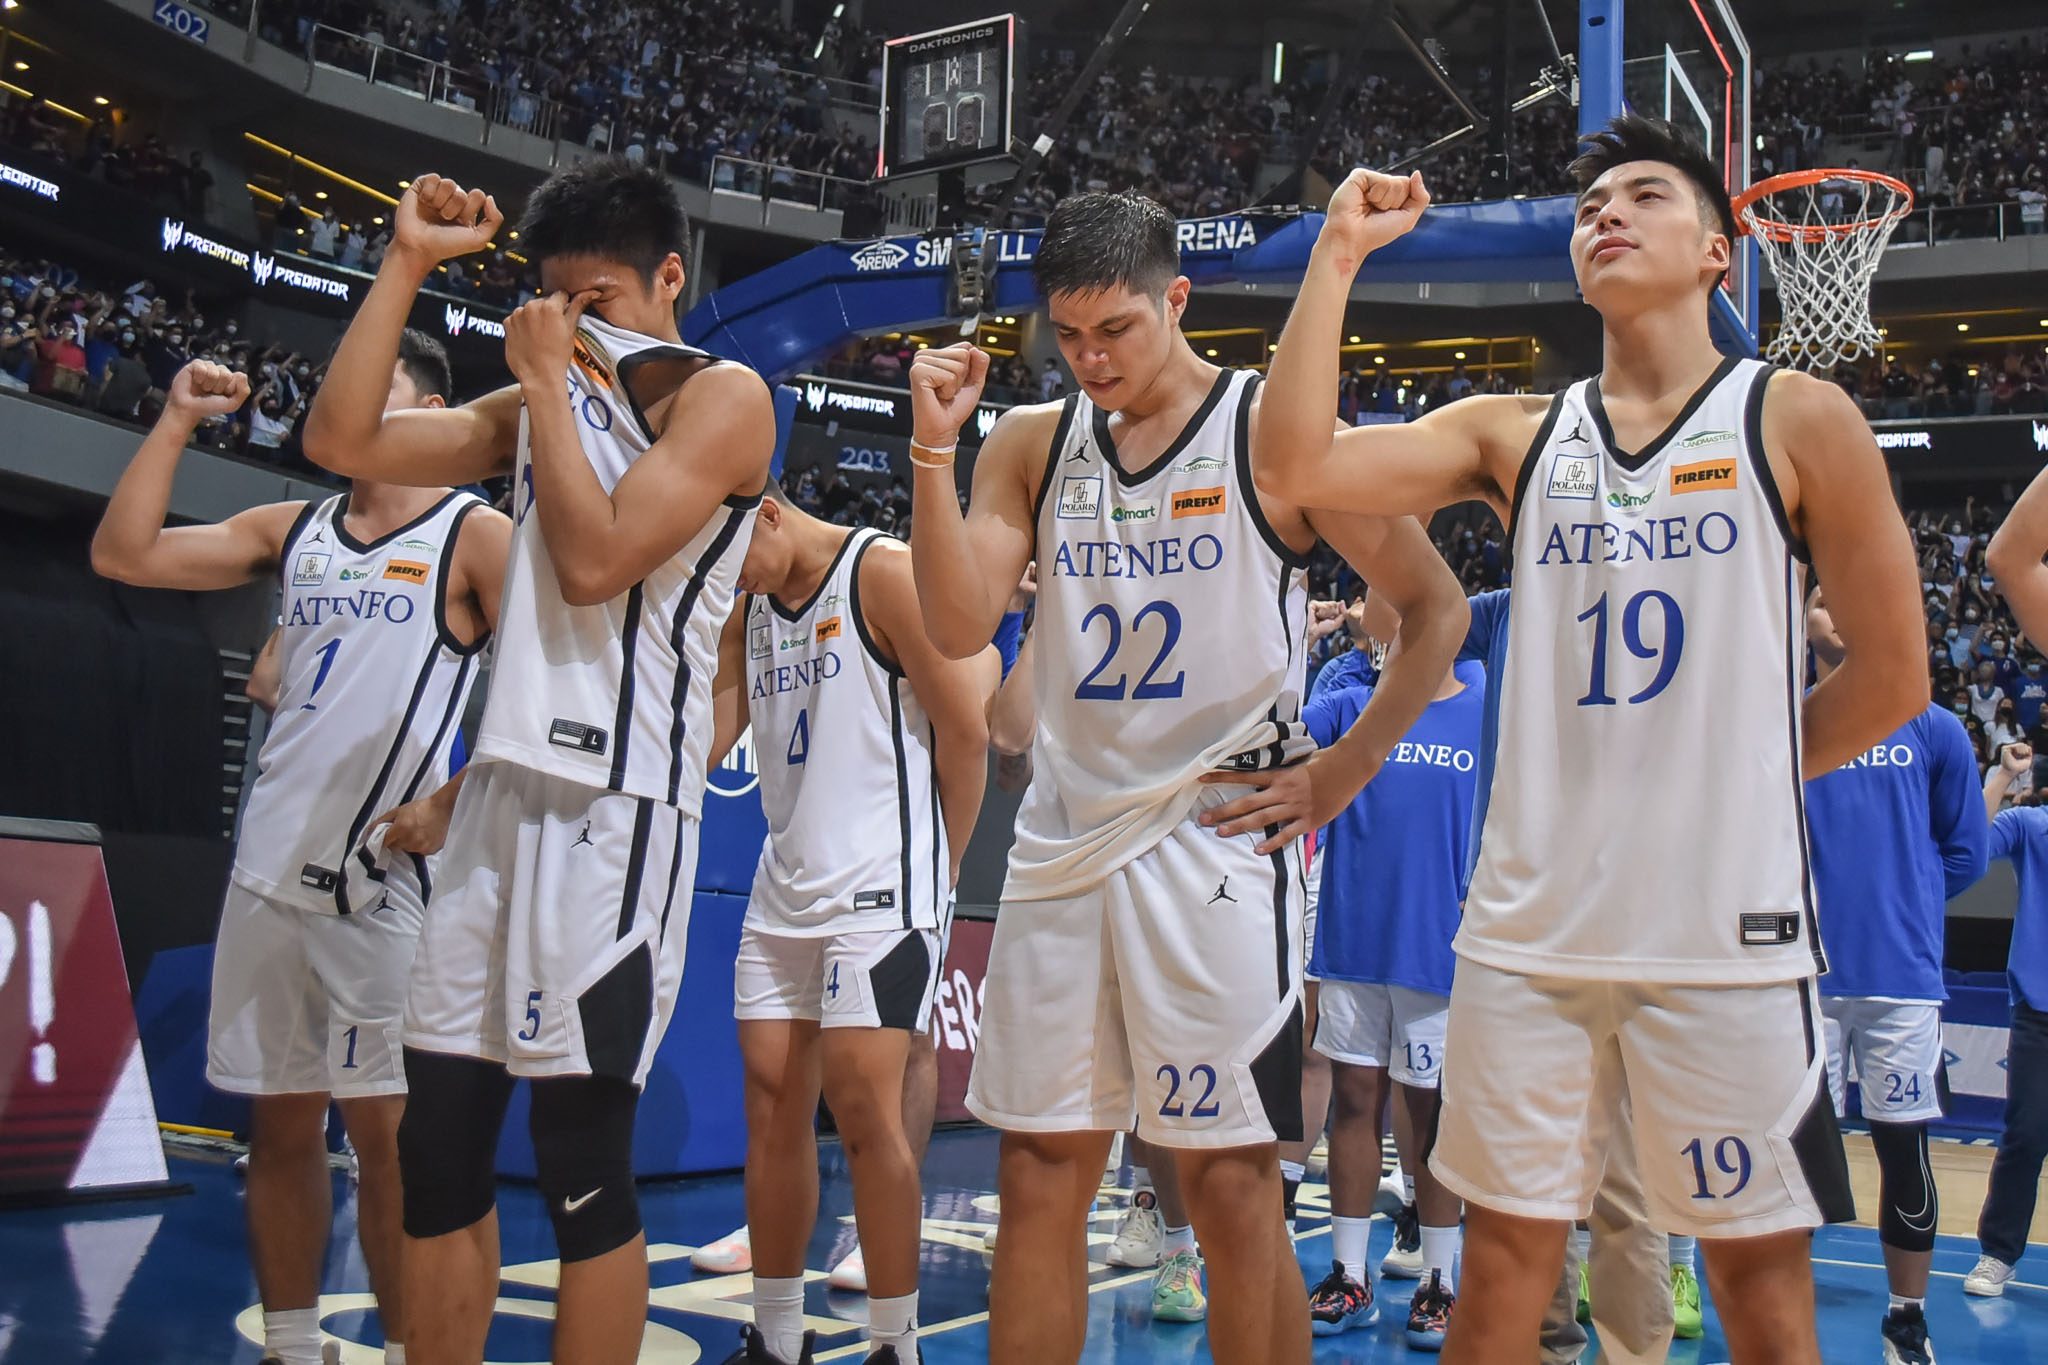 Tab Baldwin tips hat to Ateneo seniors after ‘extremely difficult’ season